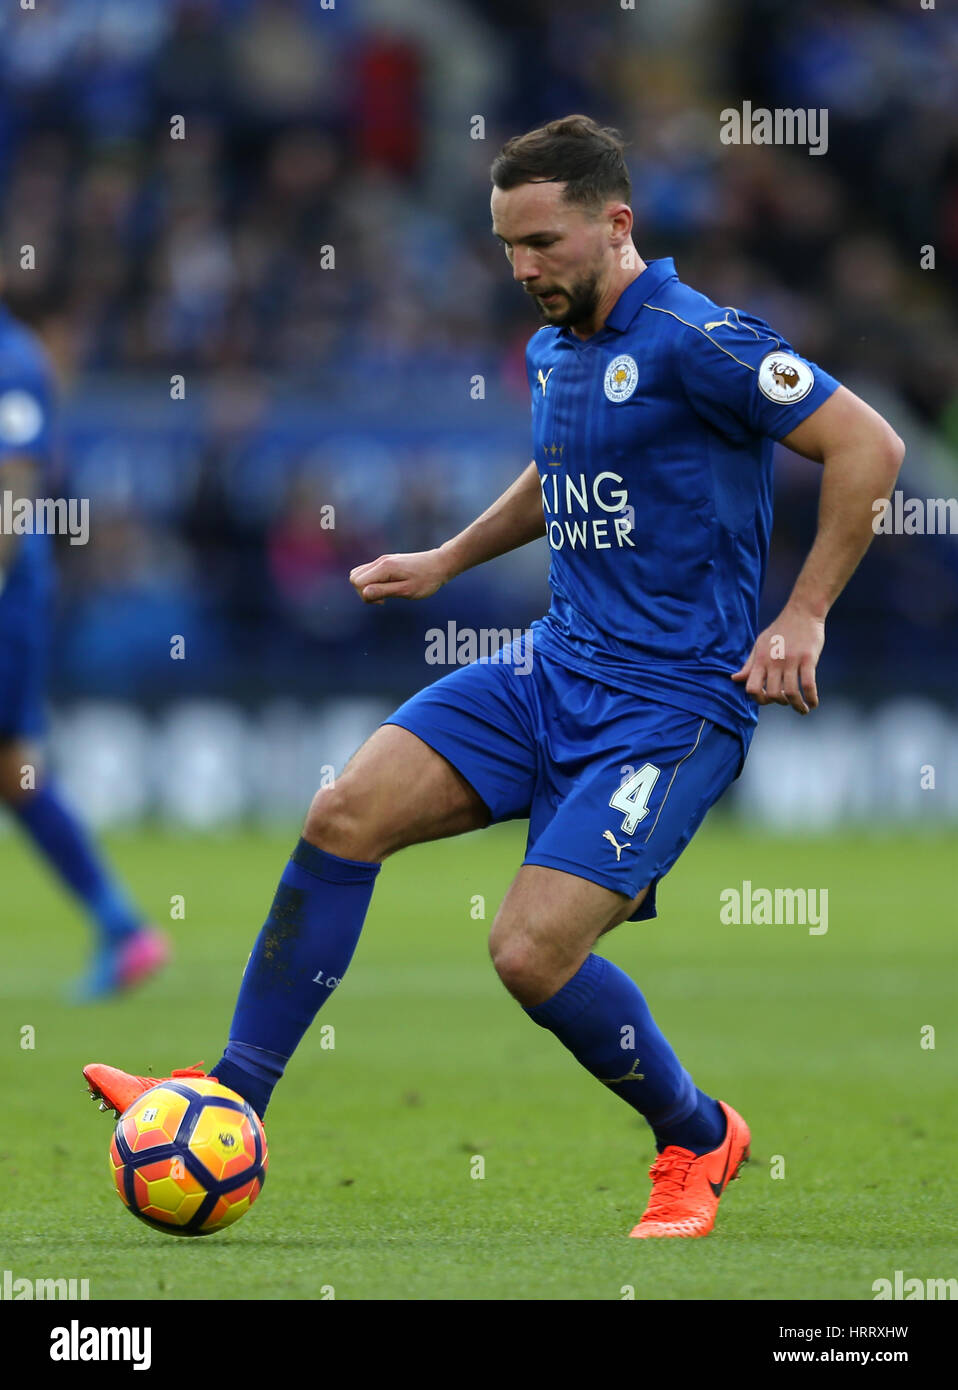 Leicester City's Daniel Drinkwater during the Premier League match at the King Power Stadium, Leicester. PRESS ASSOCIATION Photo. Picture date: Saturday March 4, 2017. See PA story SOCCER Leicester. Photo credit should read: Steven Paston/PA Wire. RESTRICTIONS: No use with unauthorised audio, video, data, fixture lists, club/league logos or 'live' services. Online in-match use limited to 75 images, no video emulation. No use in betting, games or single club/league/player publications. Stock Photo